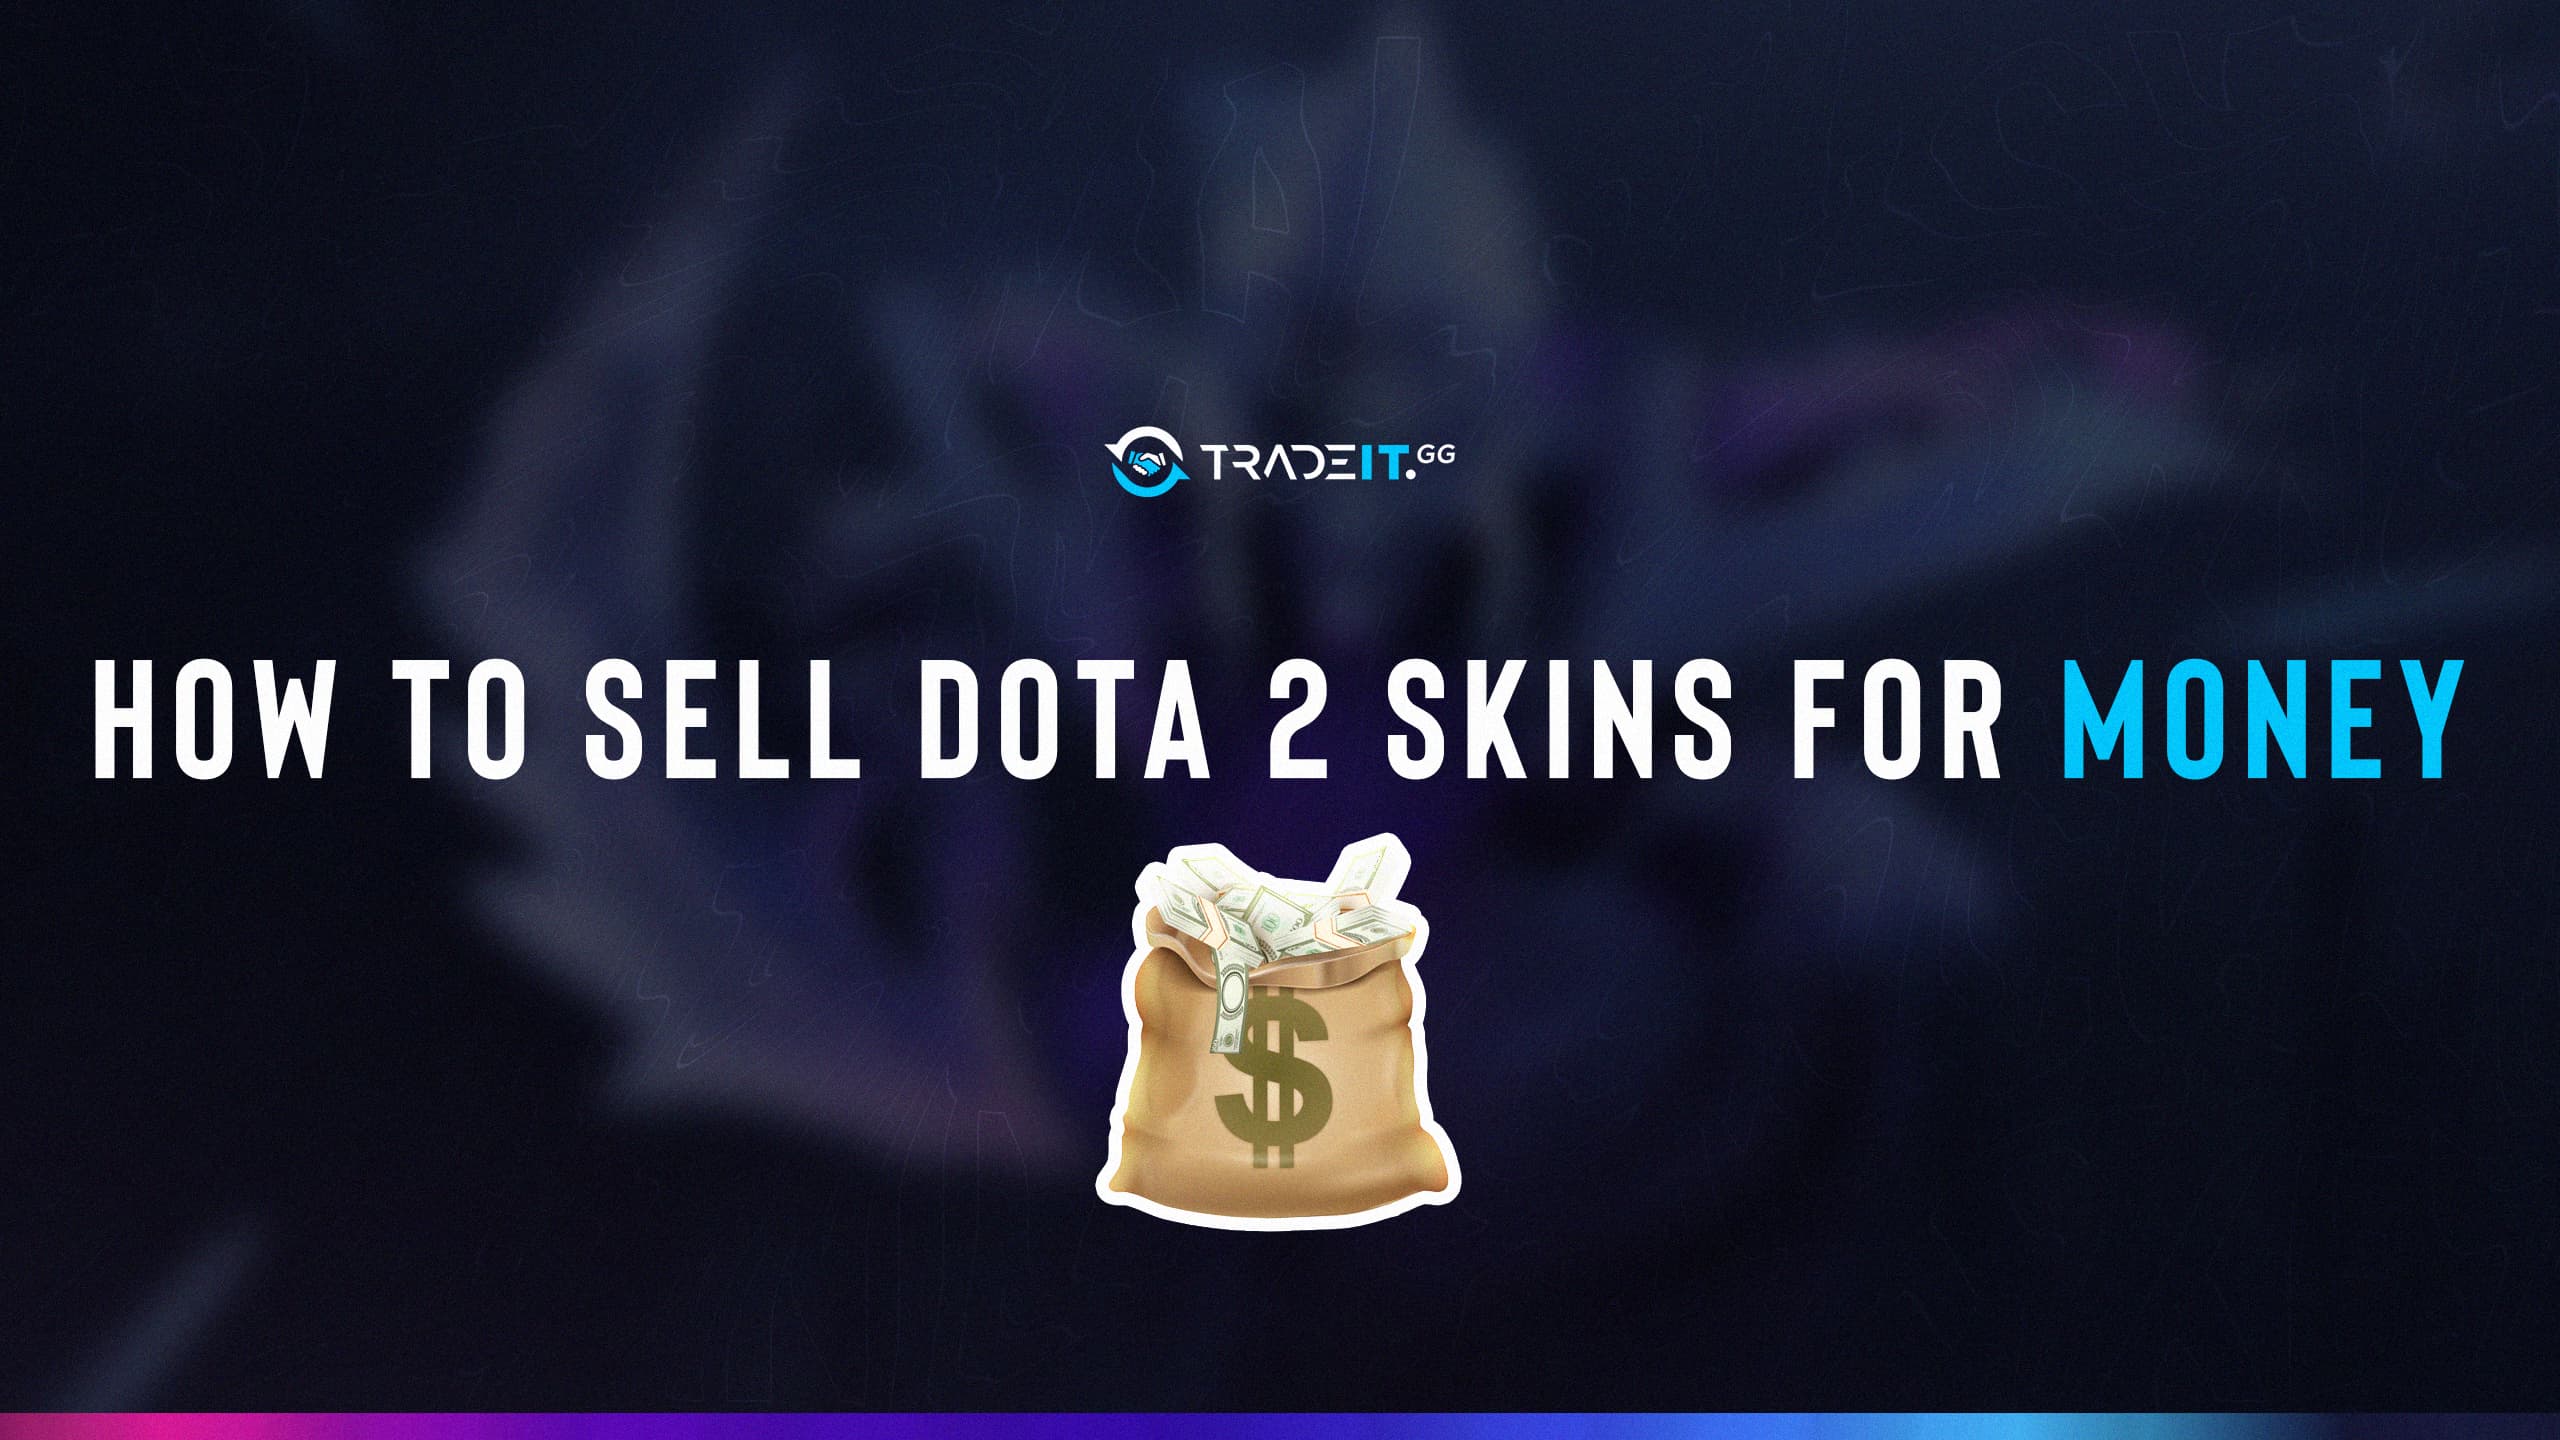 How To Make Your Product Stand Out With sell counter strike 2 skins